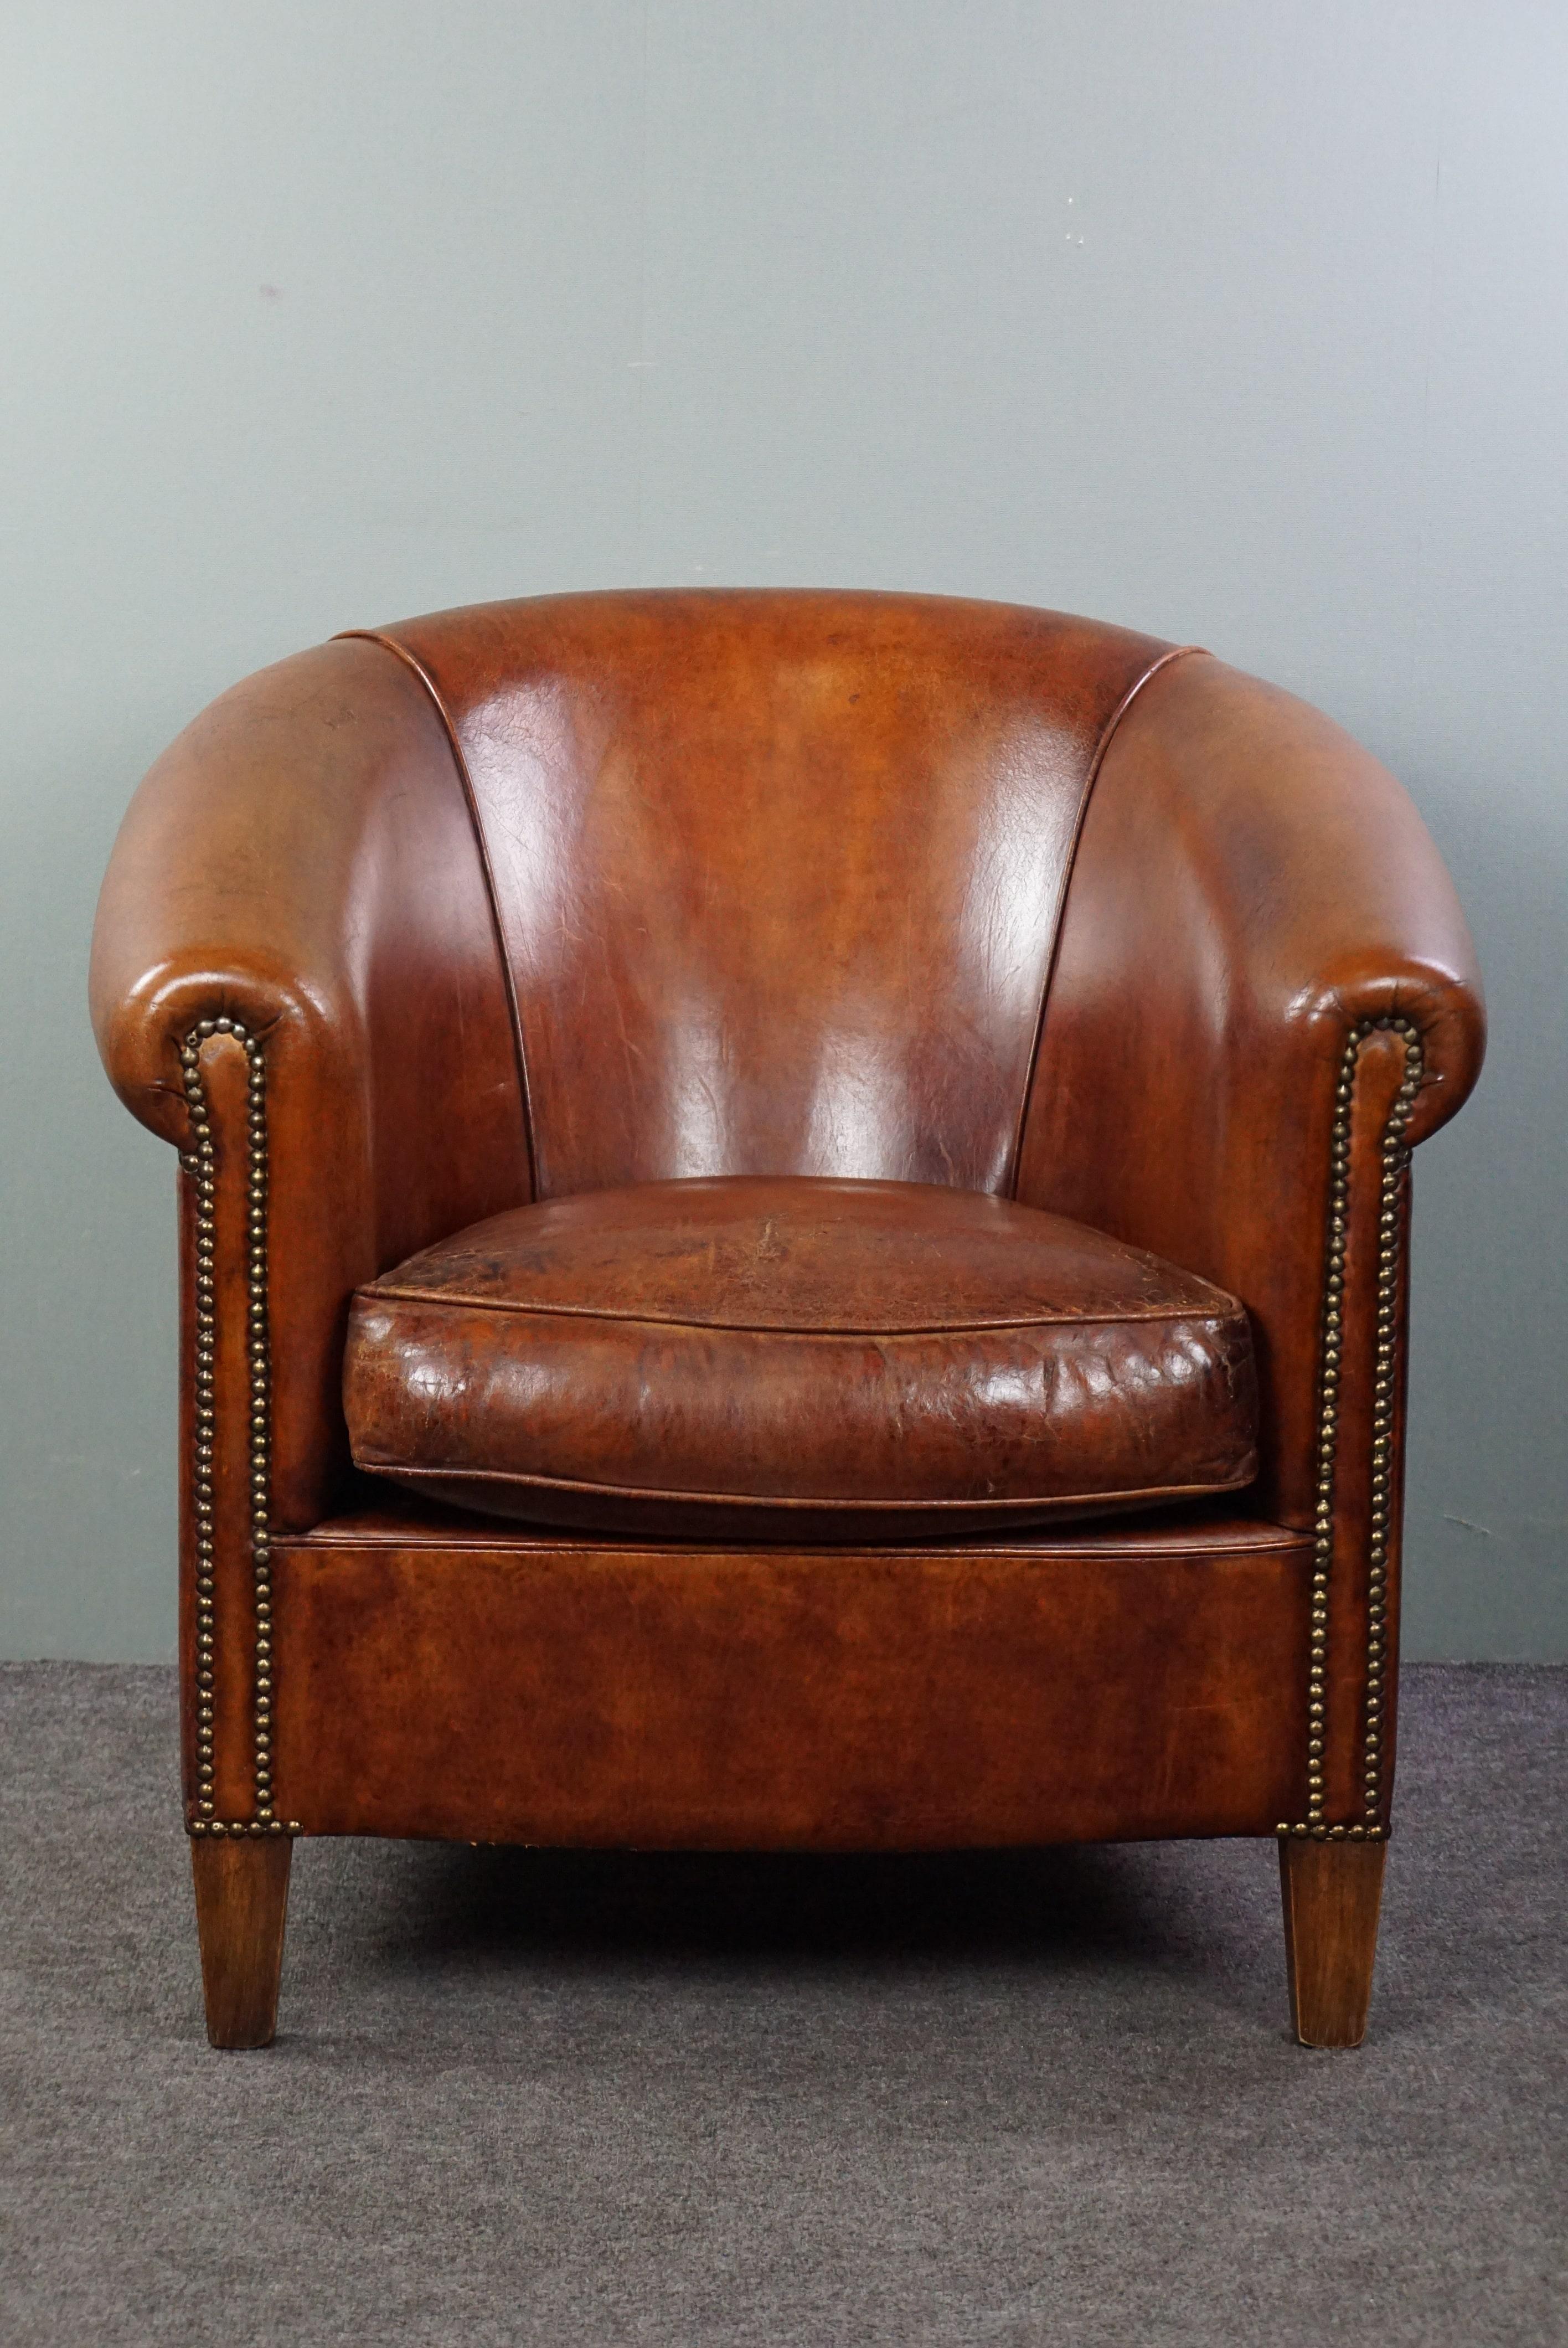 Offered is this beautiful, honest sheep leather club armchair in a fantastic warm cognac/chestnut shade. This beautiful, timeless piece elicits immediate desire in many people, and we completely understand why! There are probably very few who